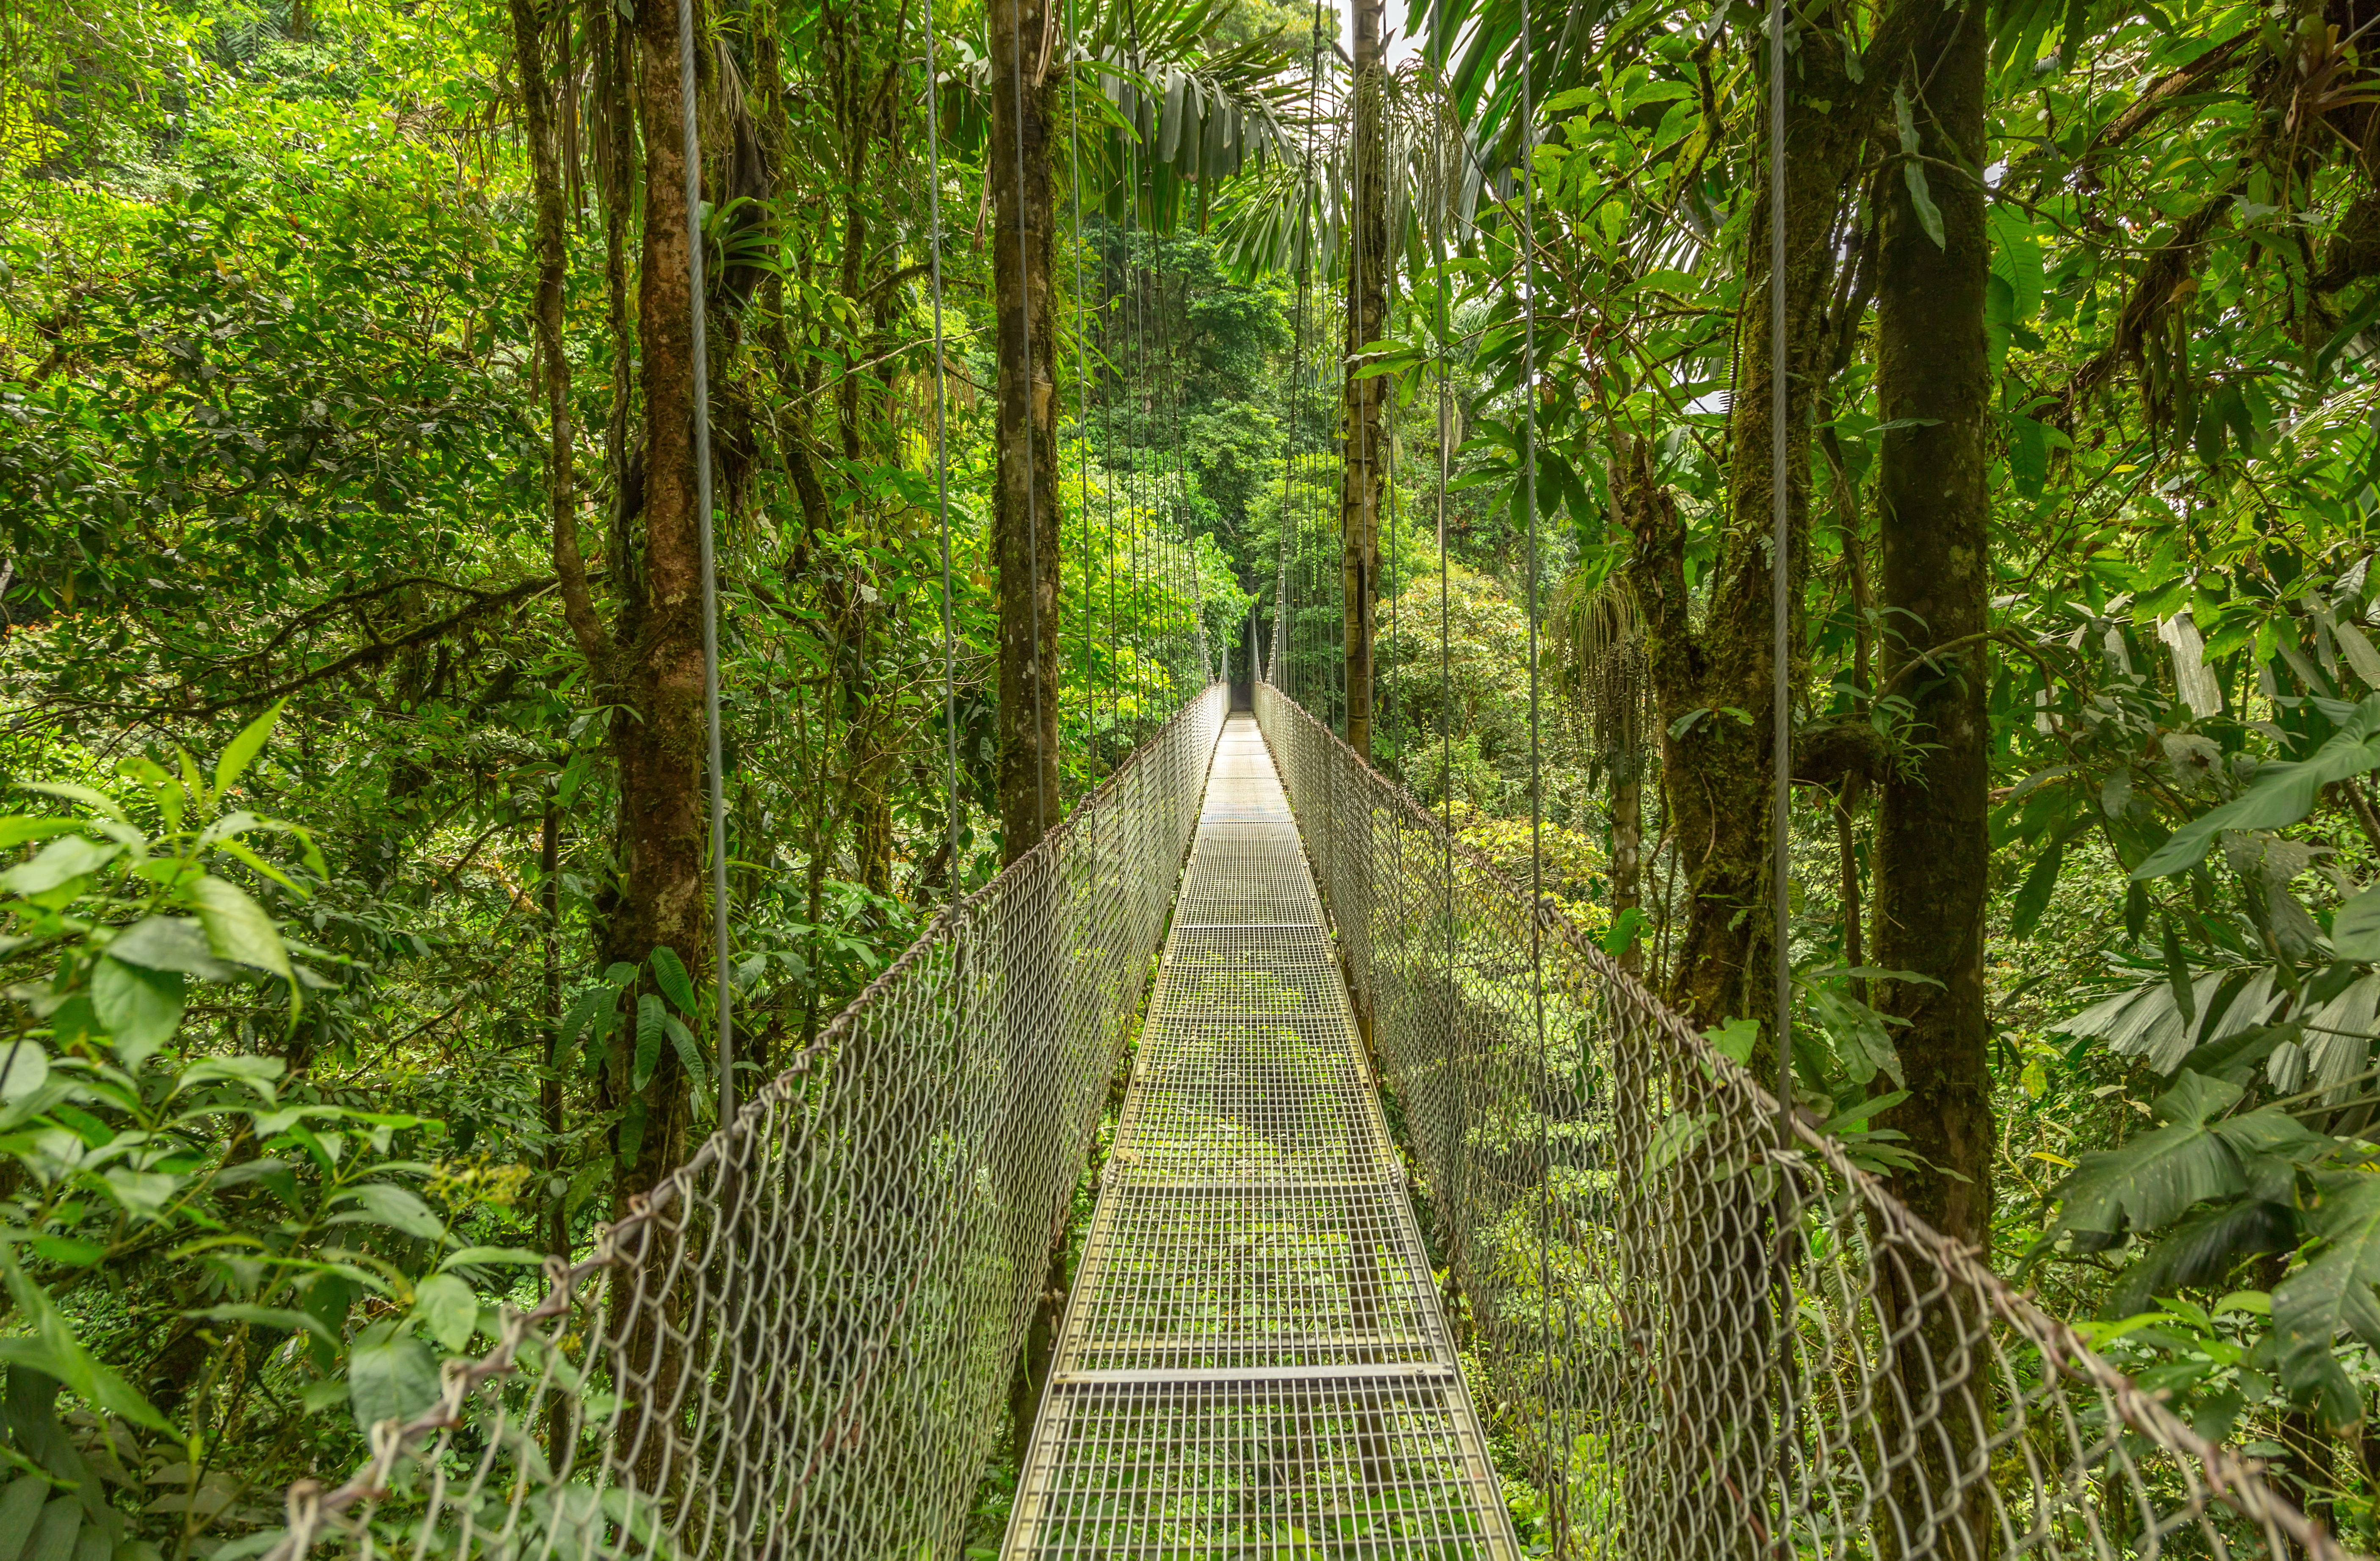 10 Days Experiencing the Beauty of Costa Rica with Your Family - Hanging Bridge in Costa Rica